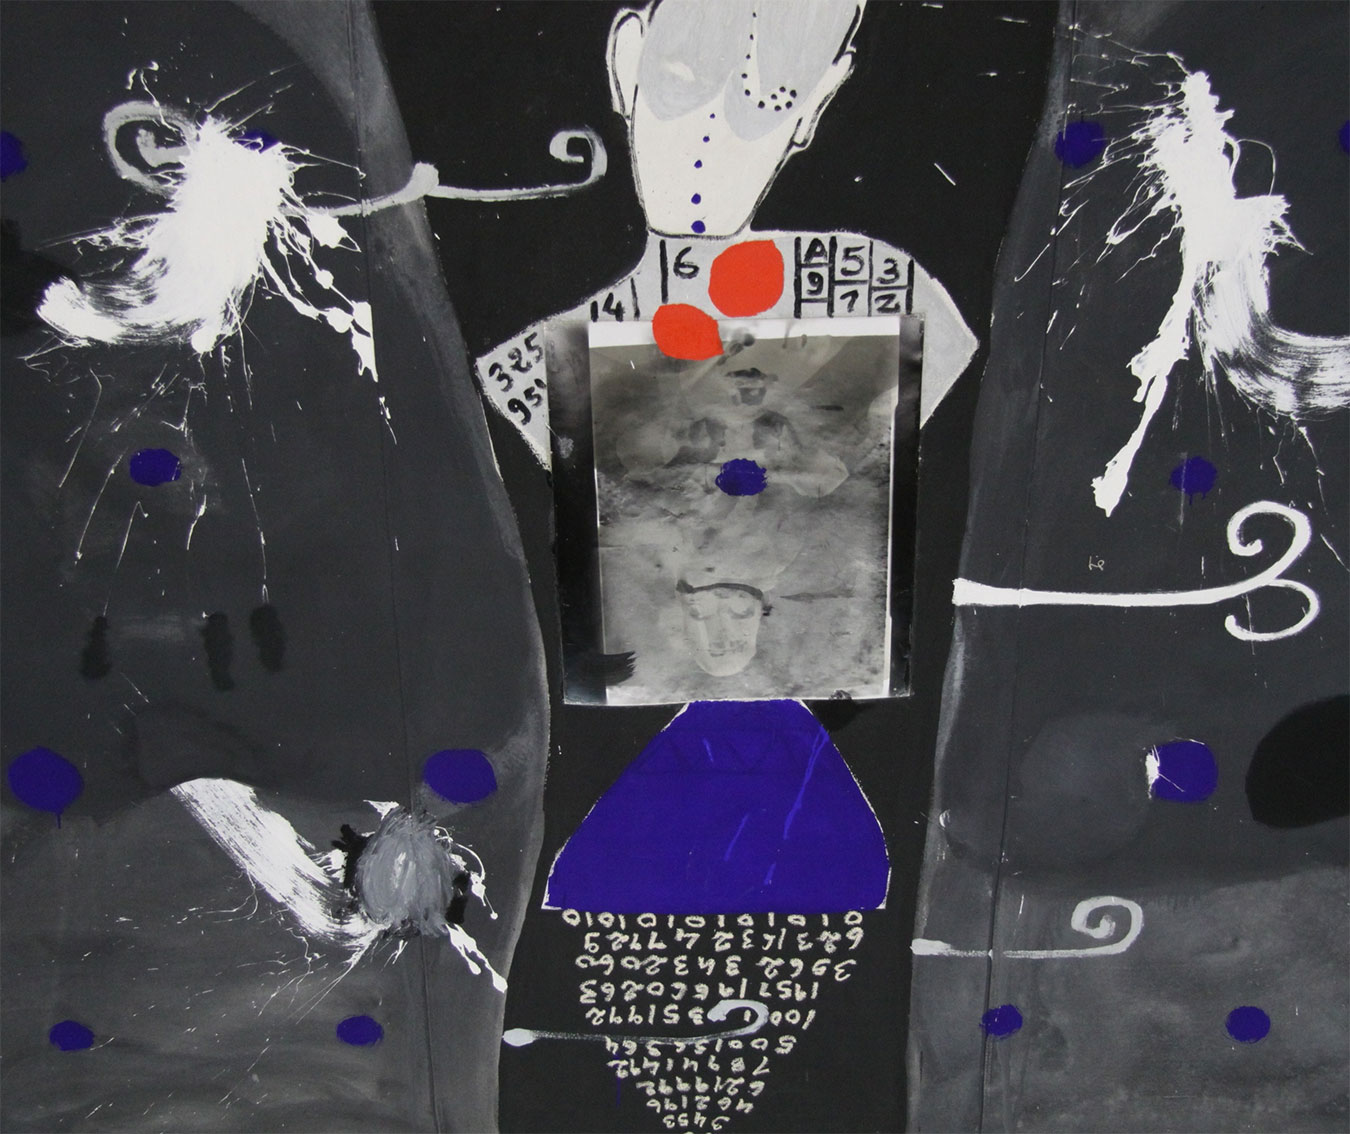 The Theatre. 2008. Format : 246 x 246 cm Mixed media on canvas